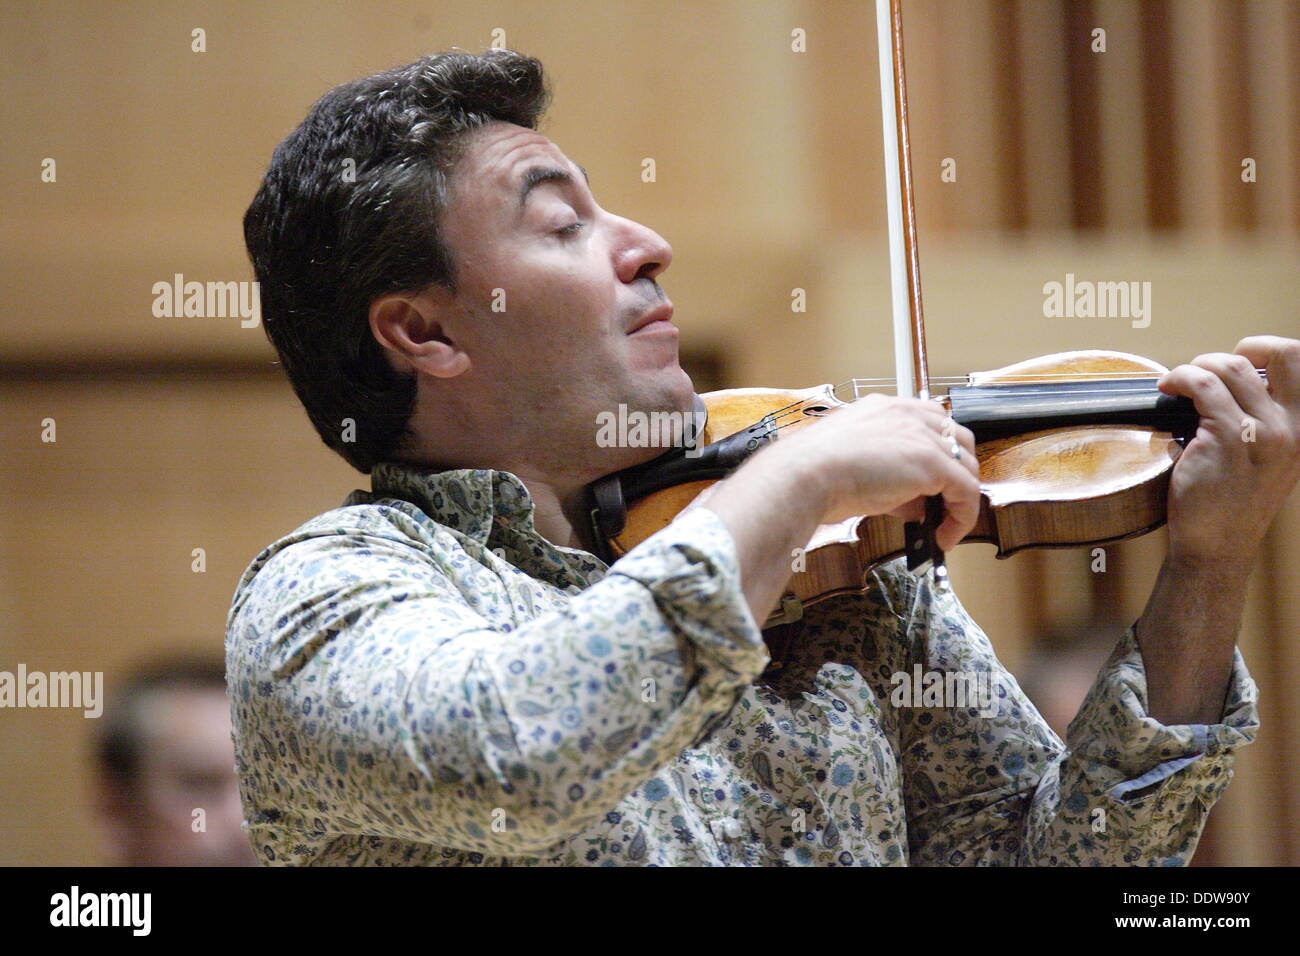 Gdansk, Poland 7th, September 2013 General rehearsal before the Maxim Vengerov concert with the International Menuhin Music Academy students as a part of Solidarity of Arts festival in Gdansk. Pictured: Russian violinist, violist, and conductor Maxim Vengerov . Credit:  Michal Fludra/Alamy Live News Stock Photo